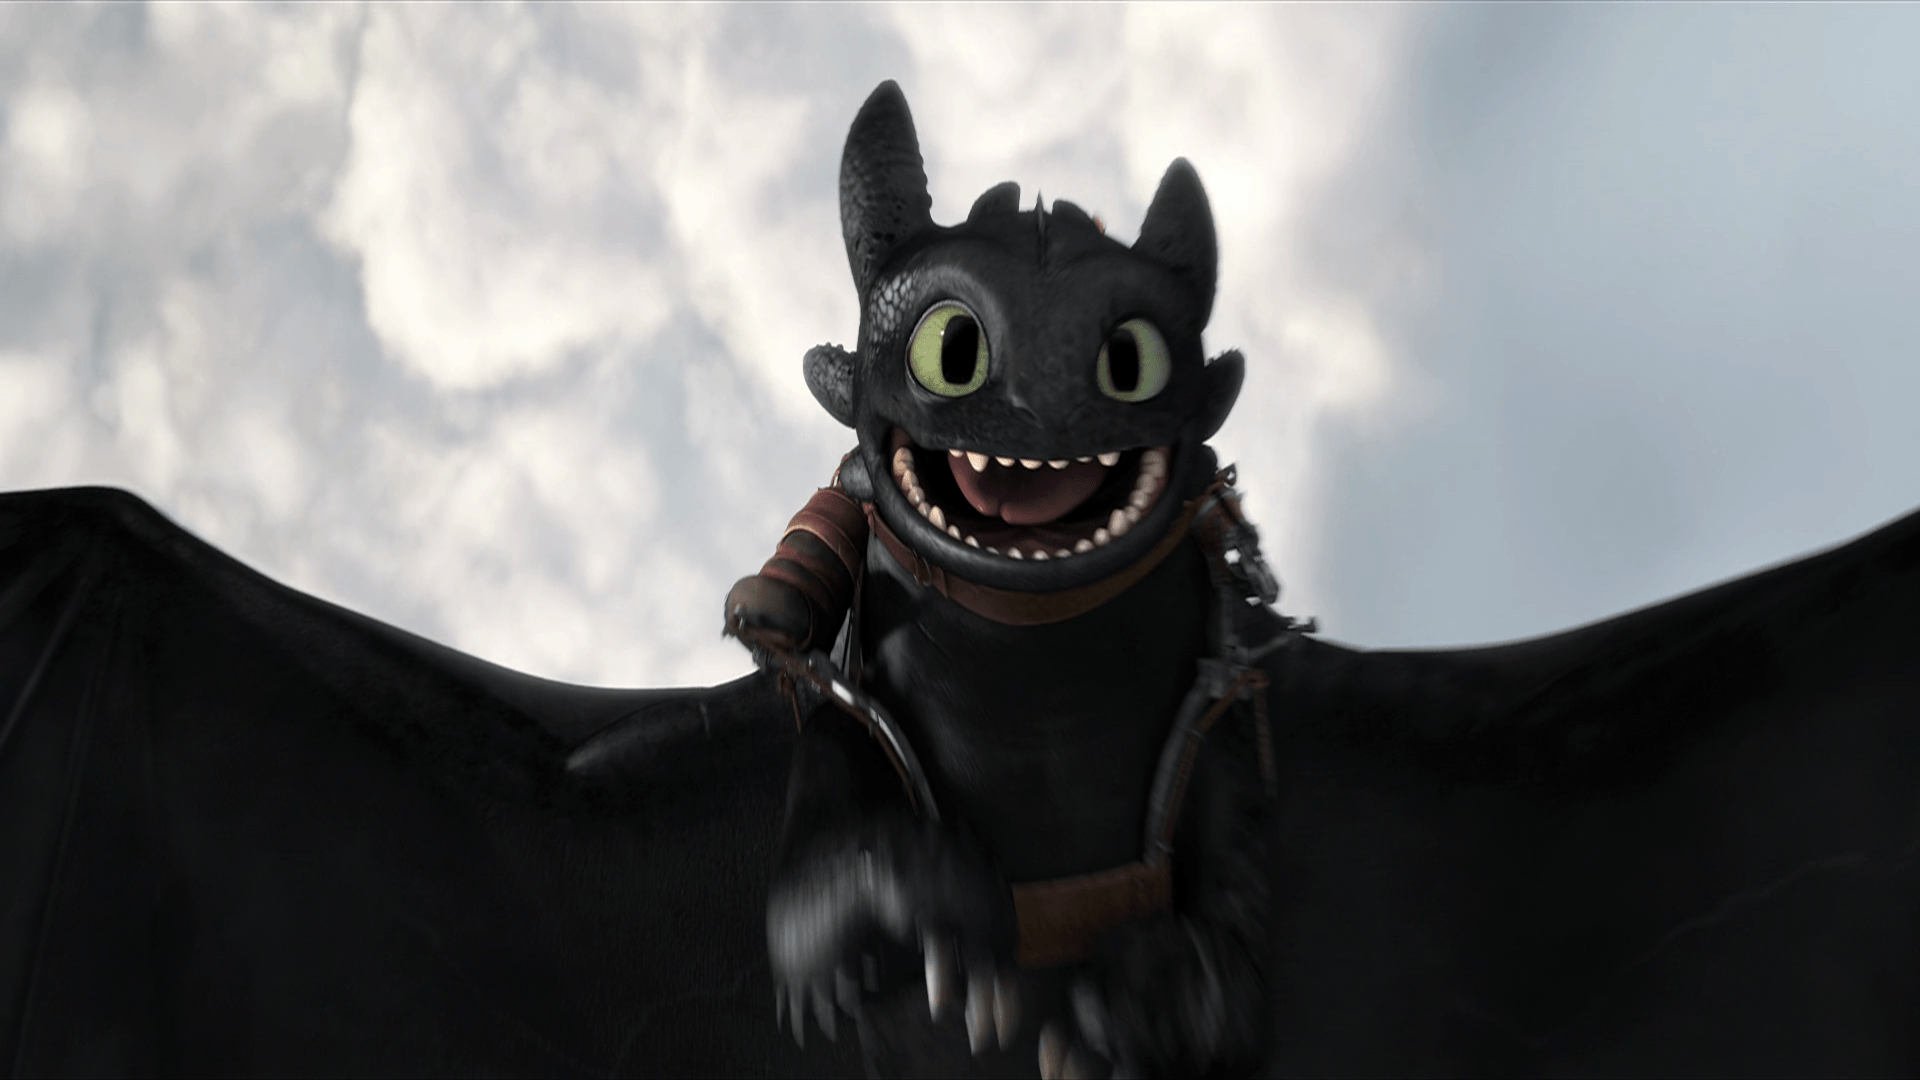 How to Train Your Dragon 2 Full HD Wallpaper